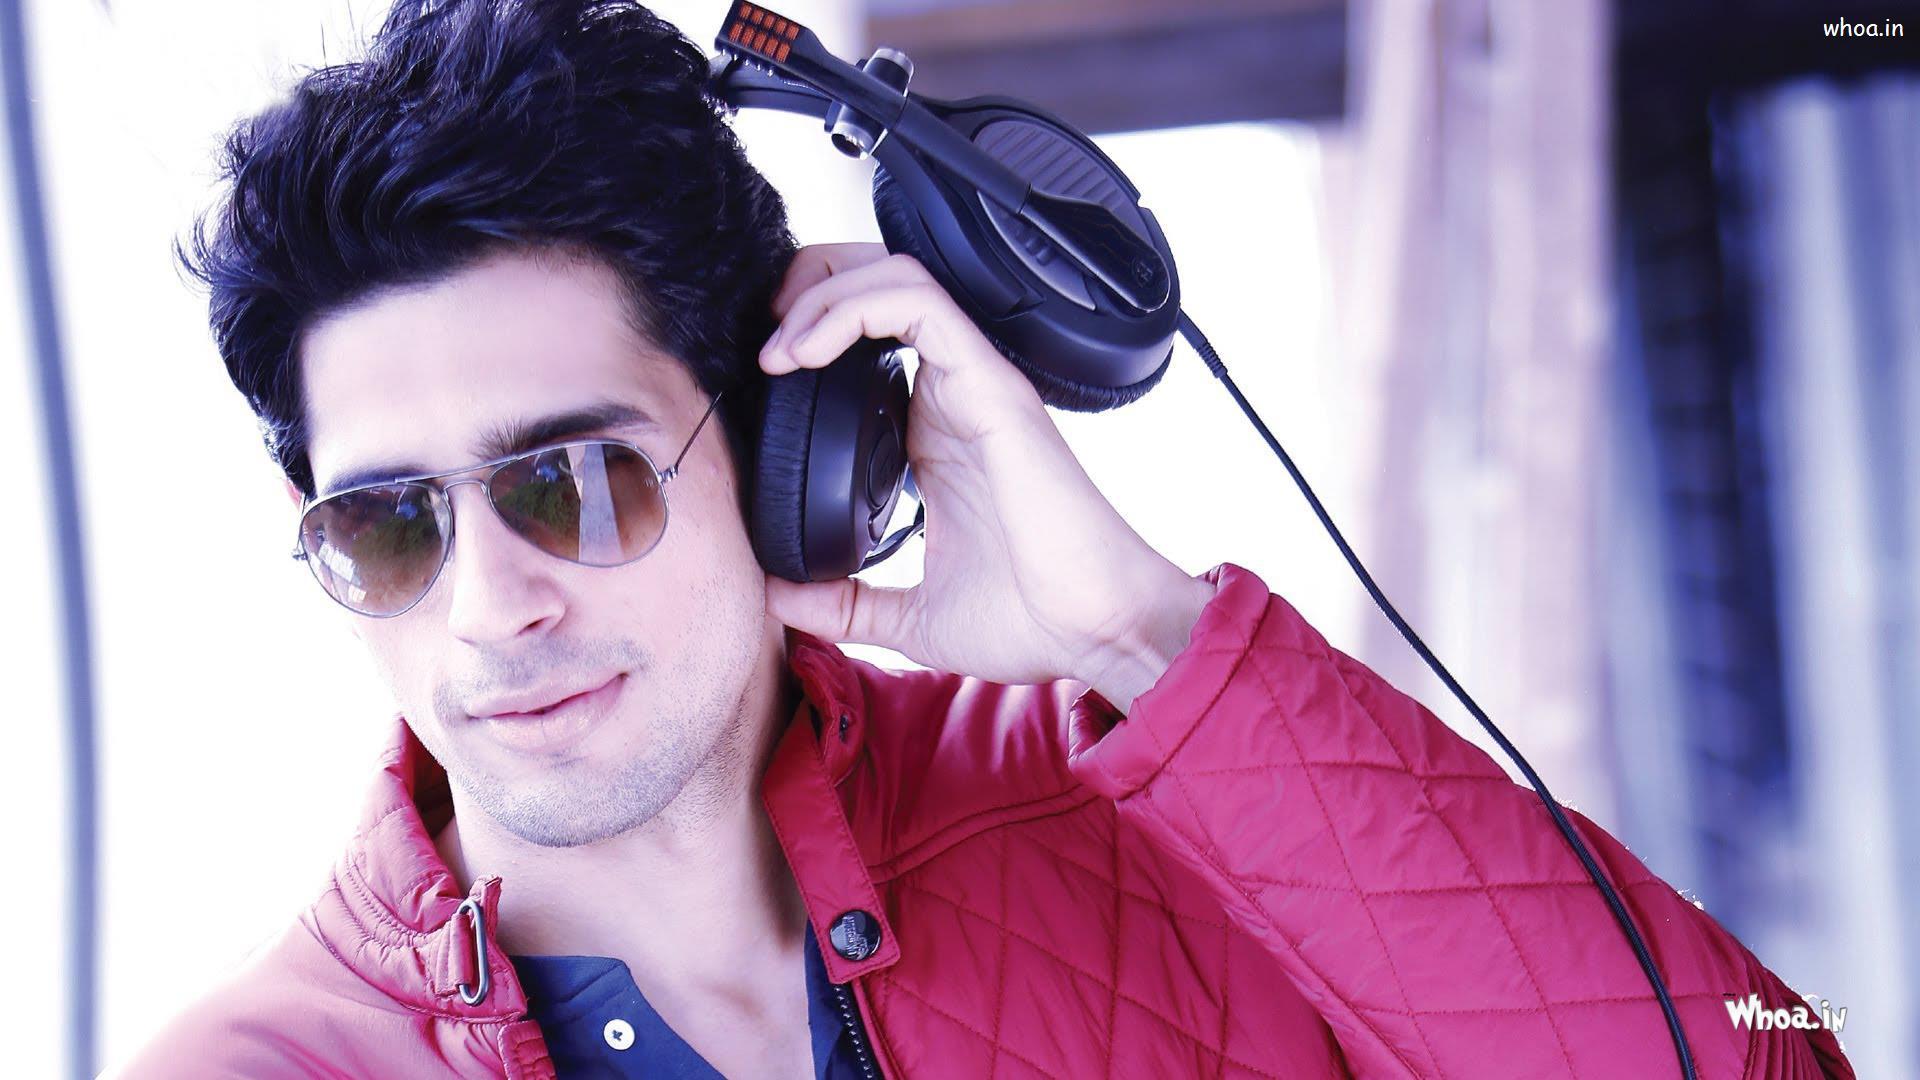 Siddharth Malhotra Sunglass With Red Jacket HD Bollywood Actor Image